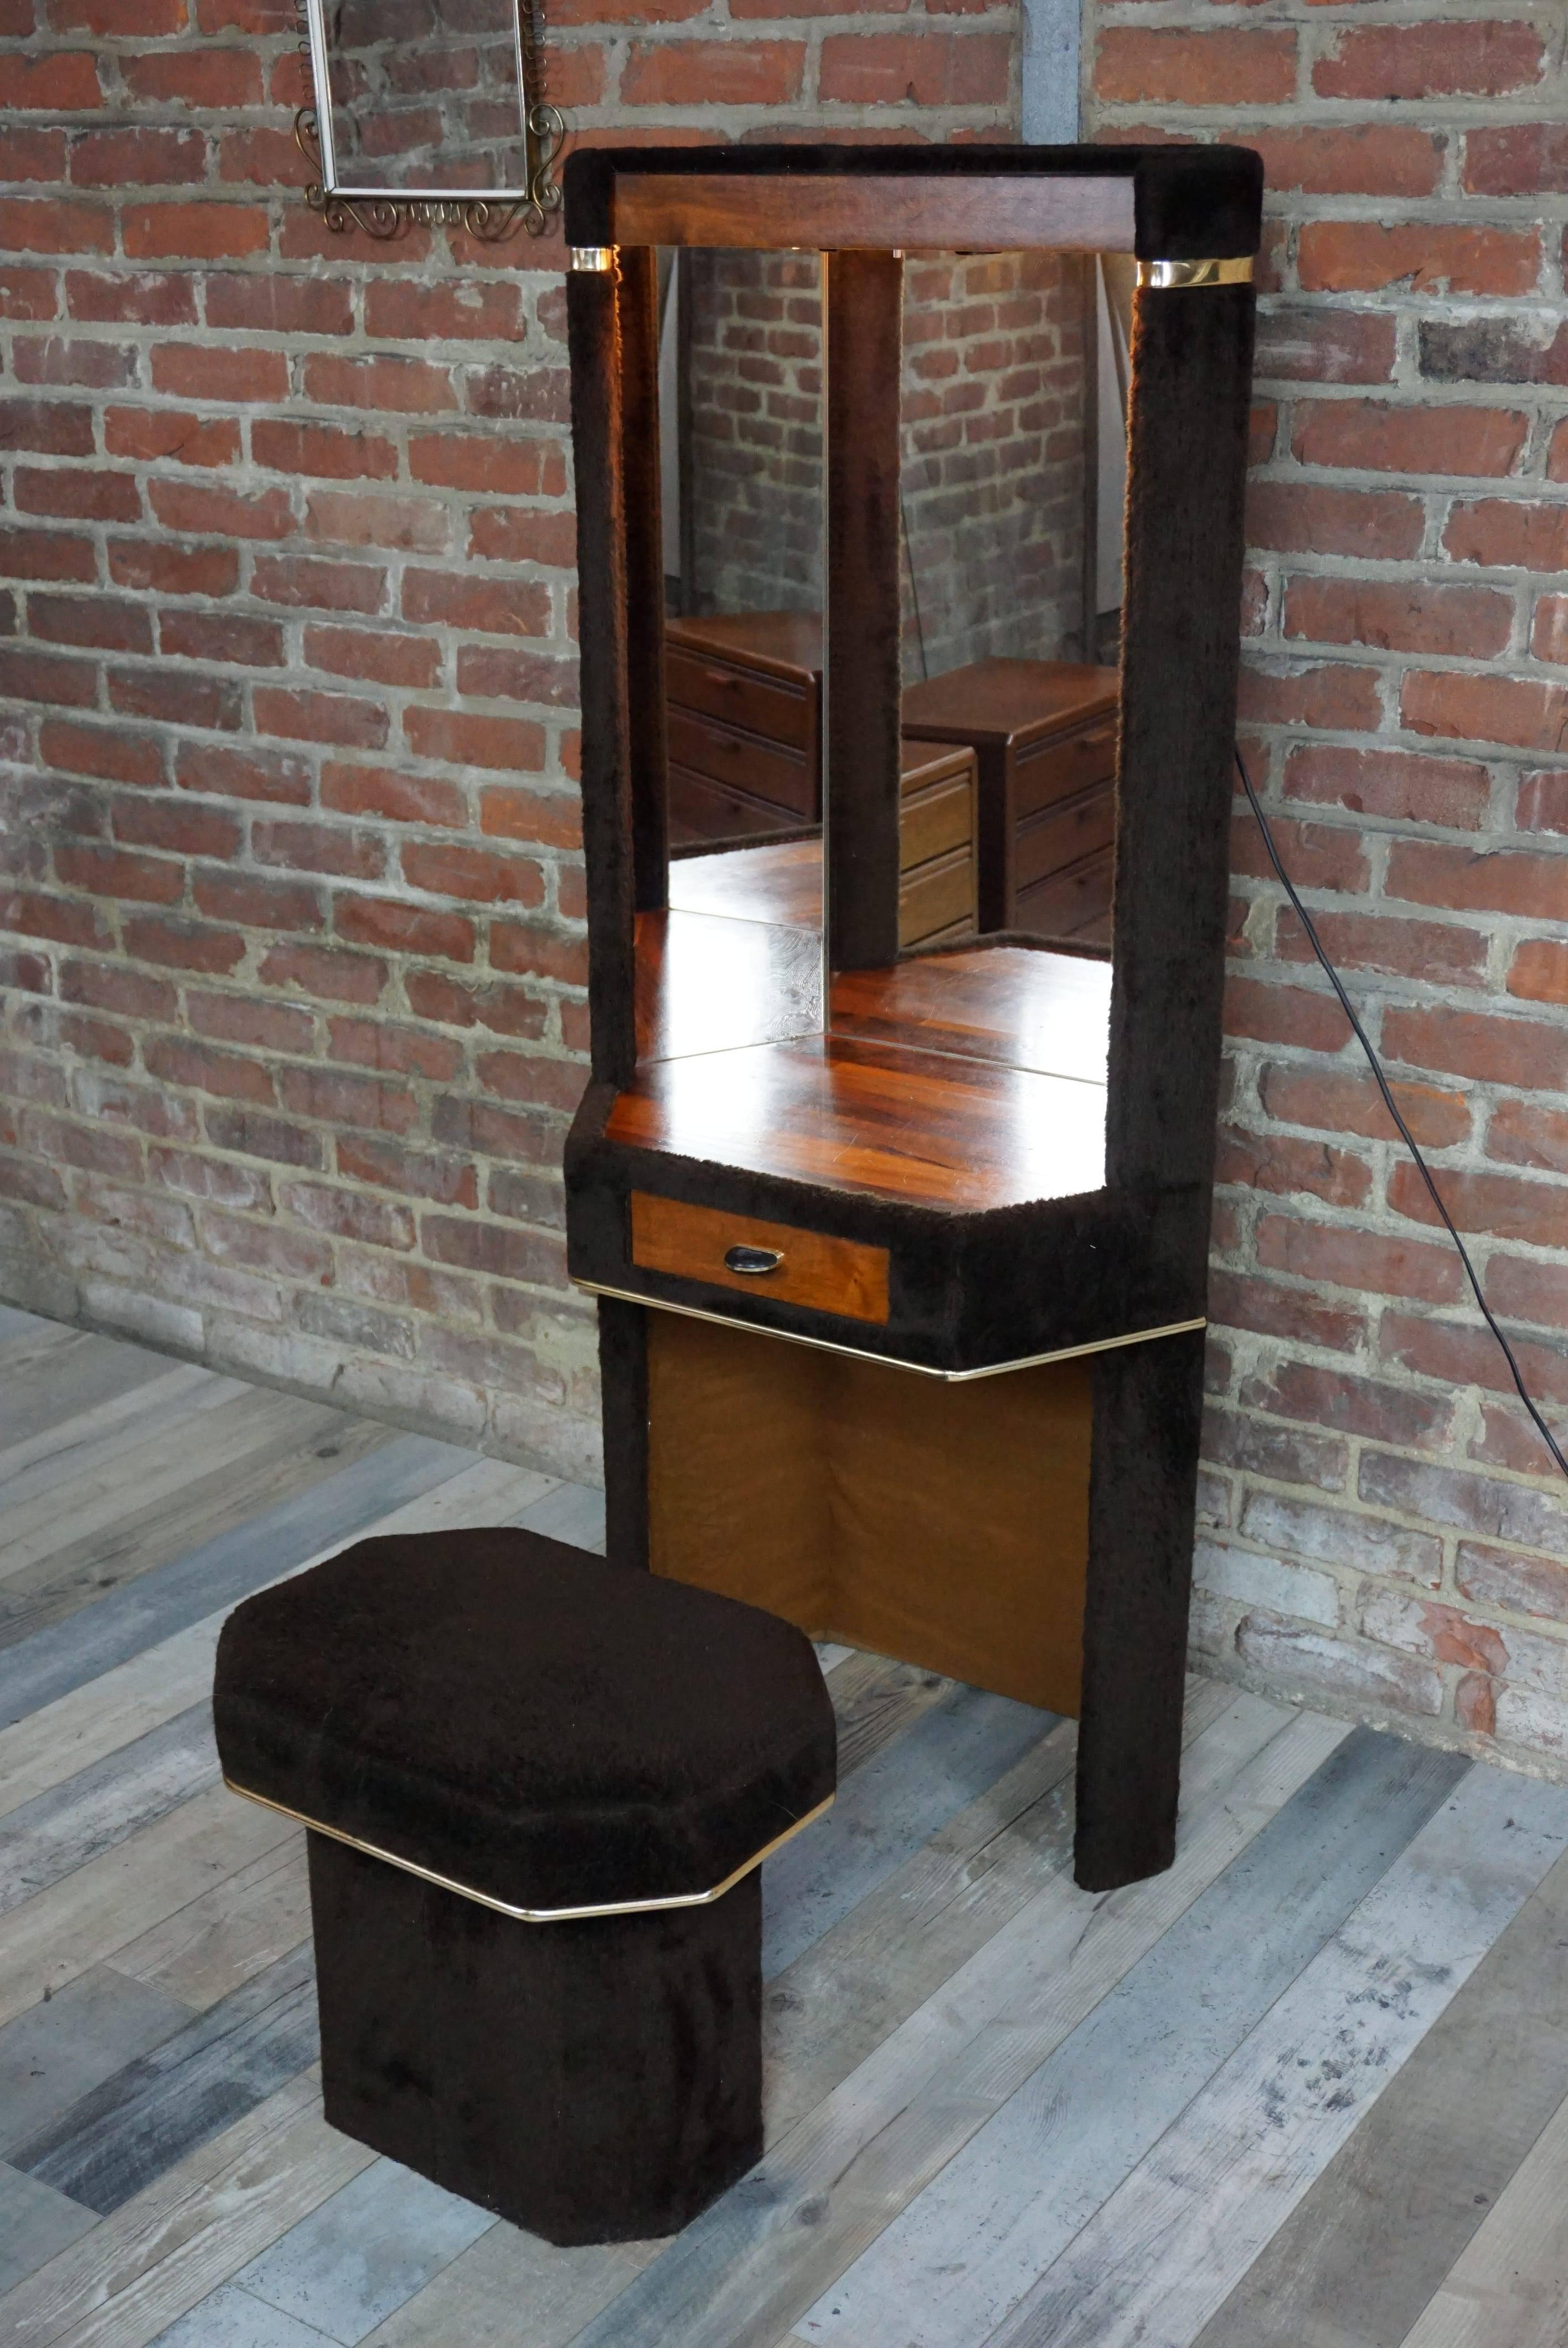 Original and very deco,
This functional hairdresser will delight space age enthusiasts.
Fur brown moumoute in very good condition.
Mirror backlit with switch on console.
Matching stool 41 cm high.